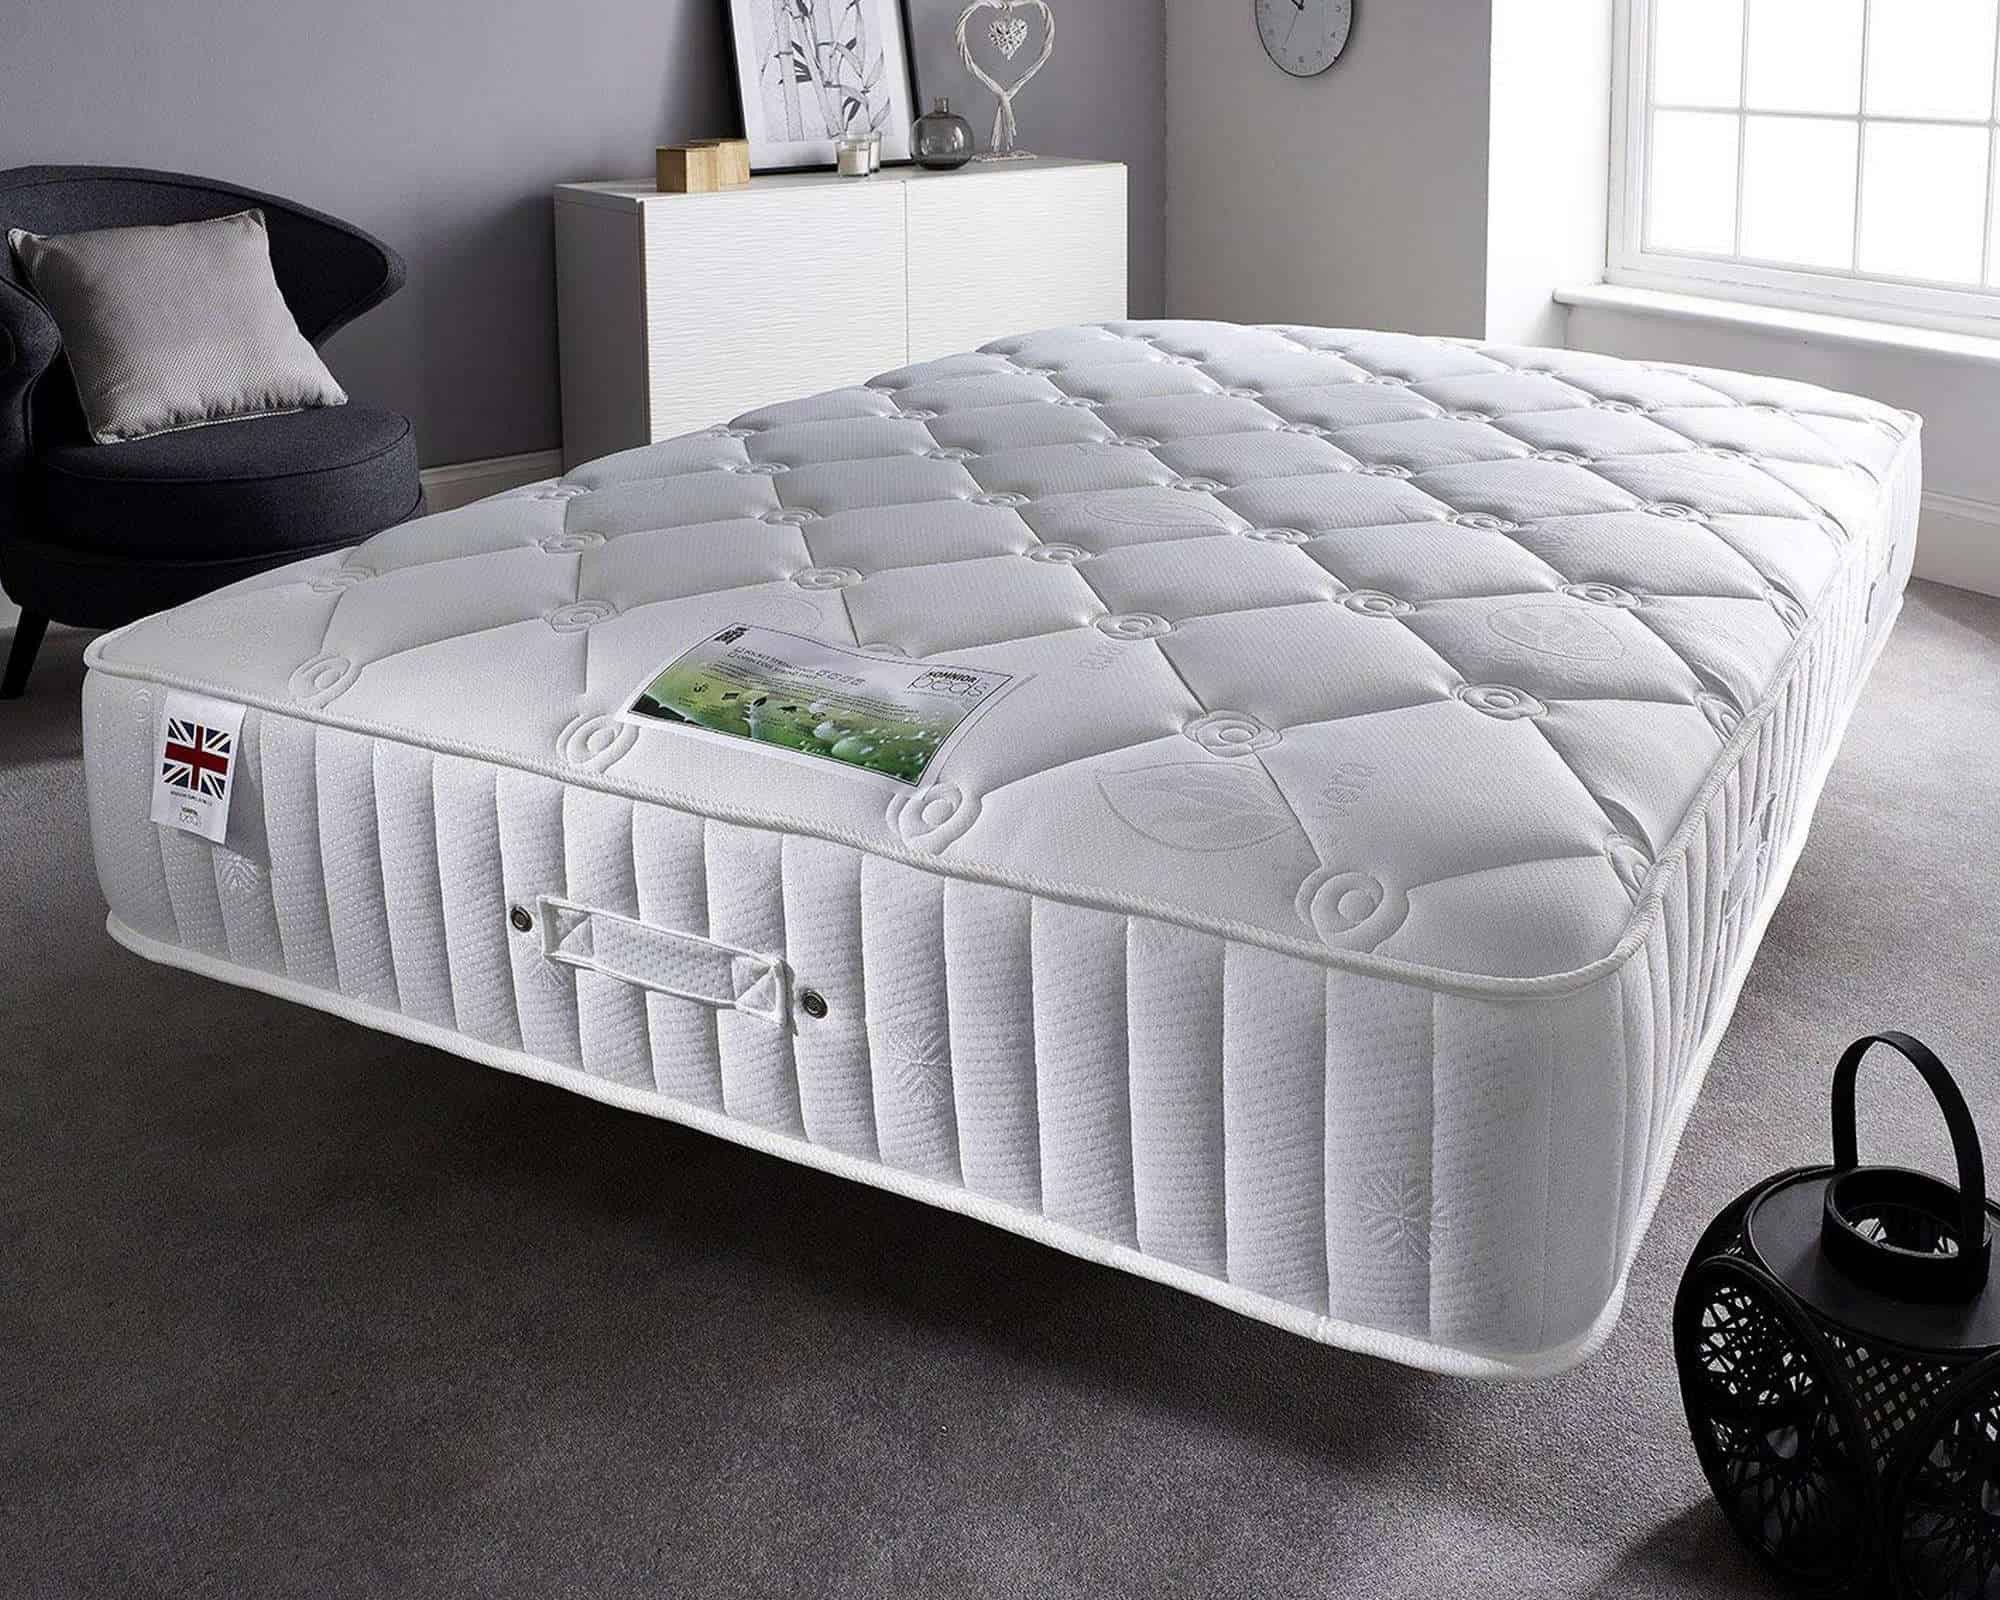 new mattresses for sale